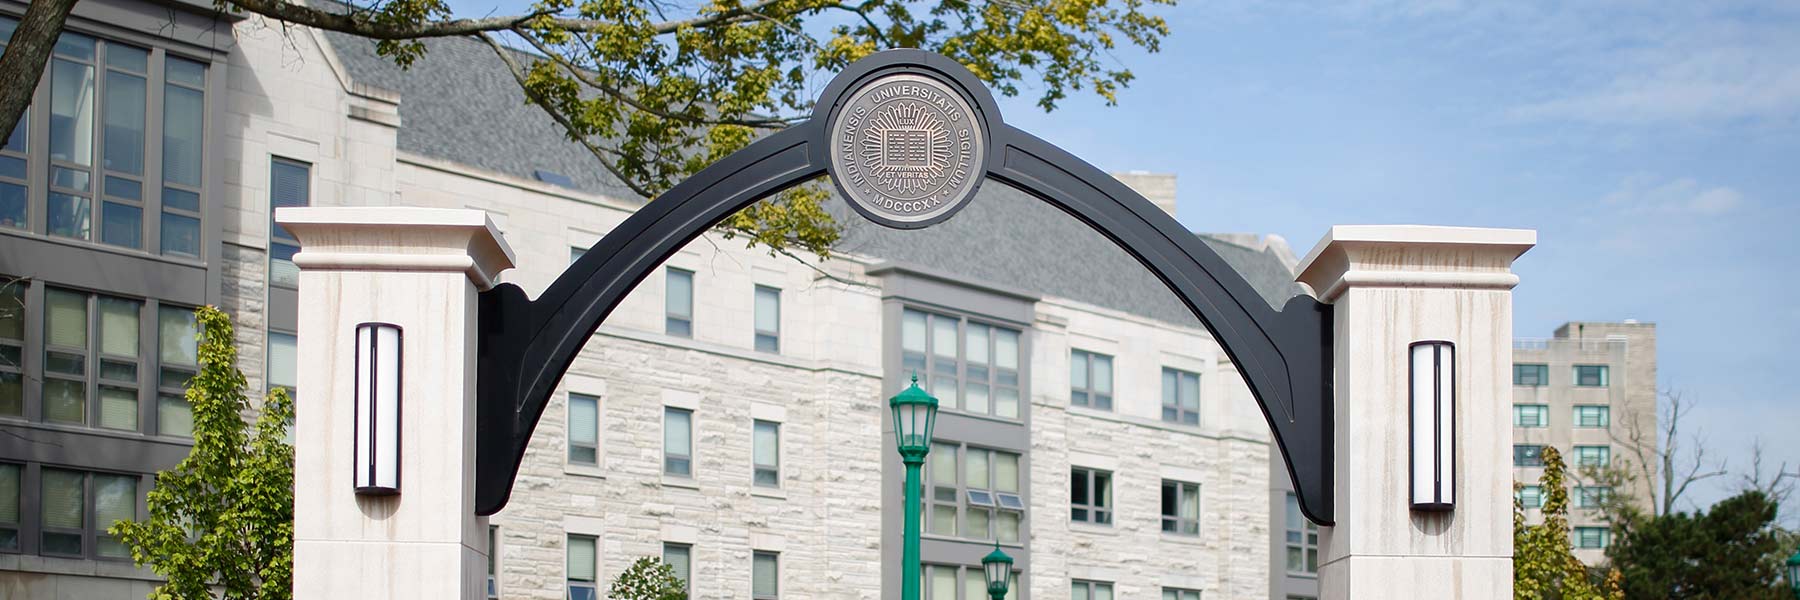 The Indiana University seal on an arched gateway.